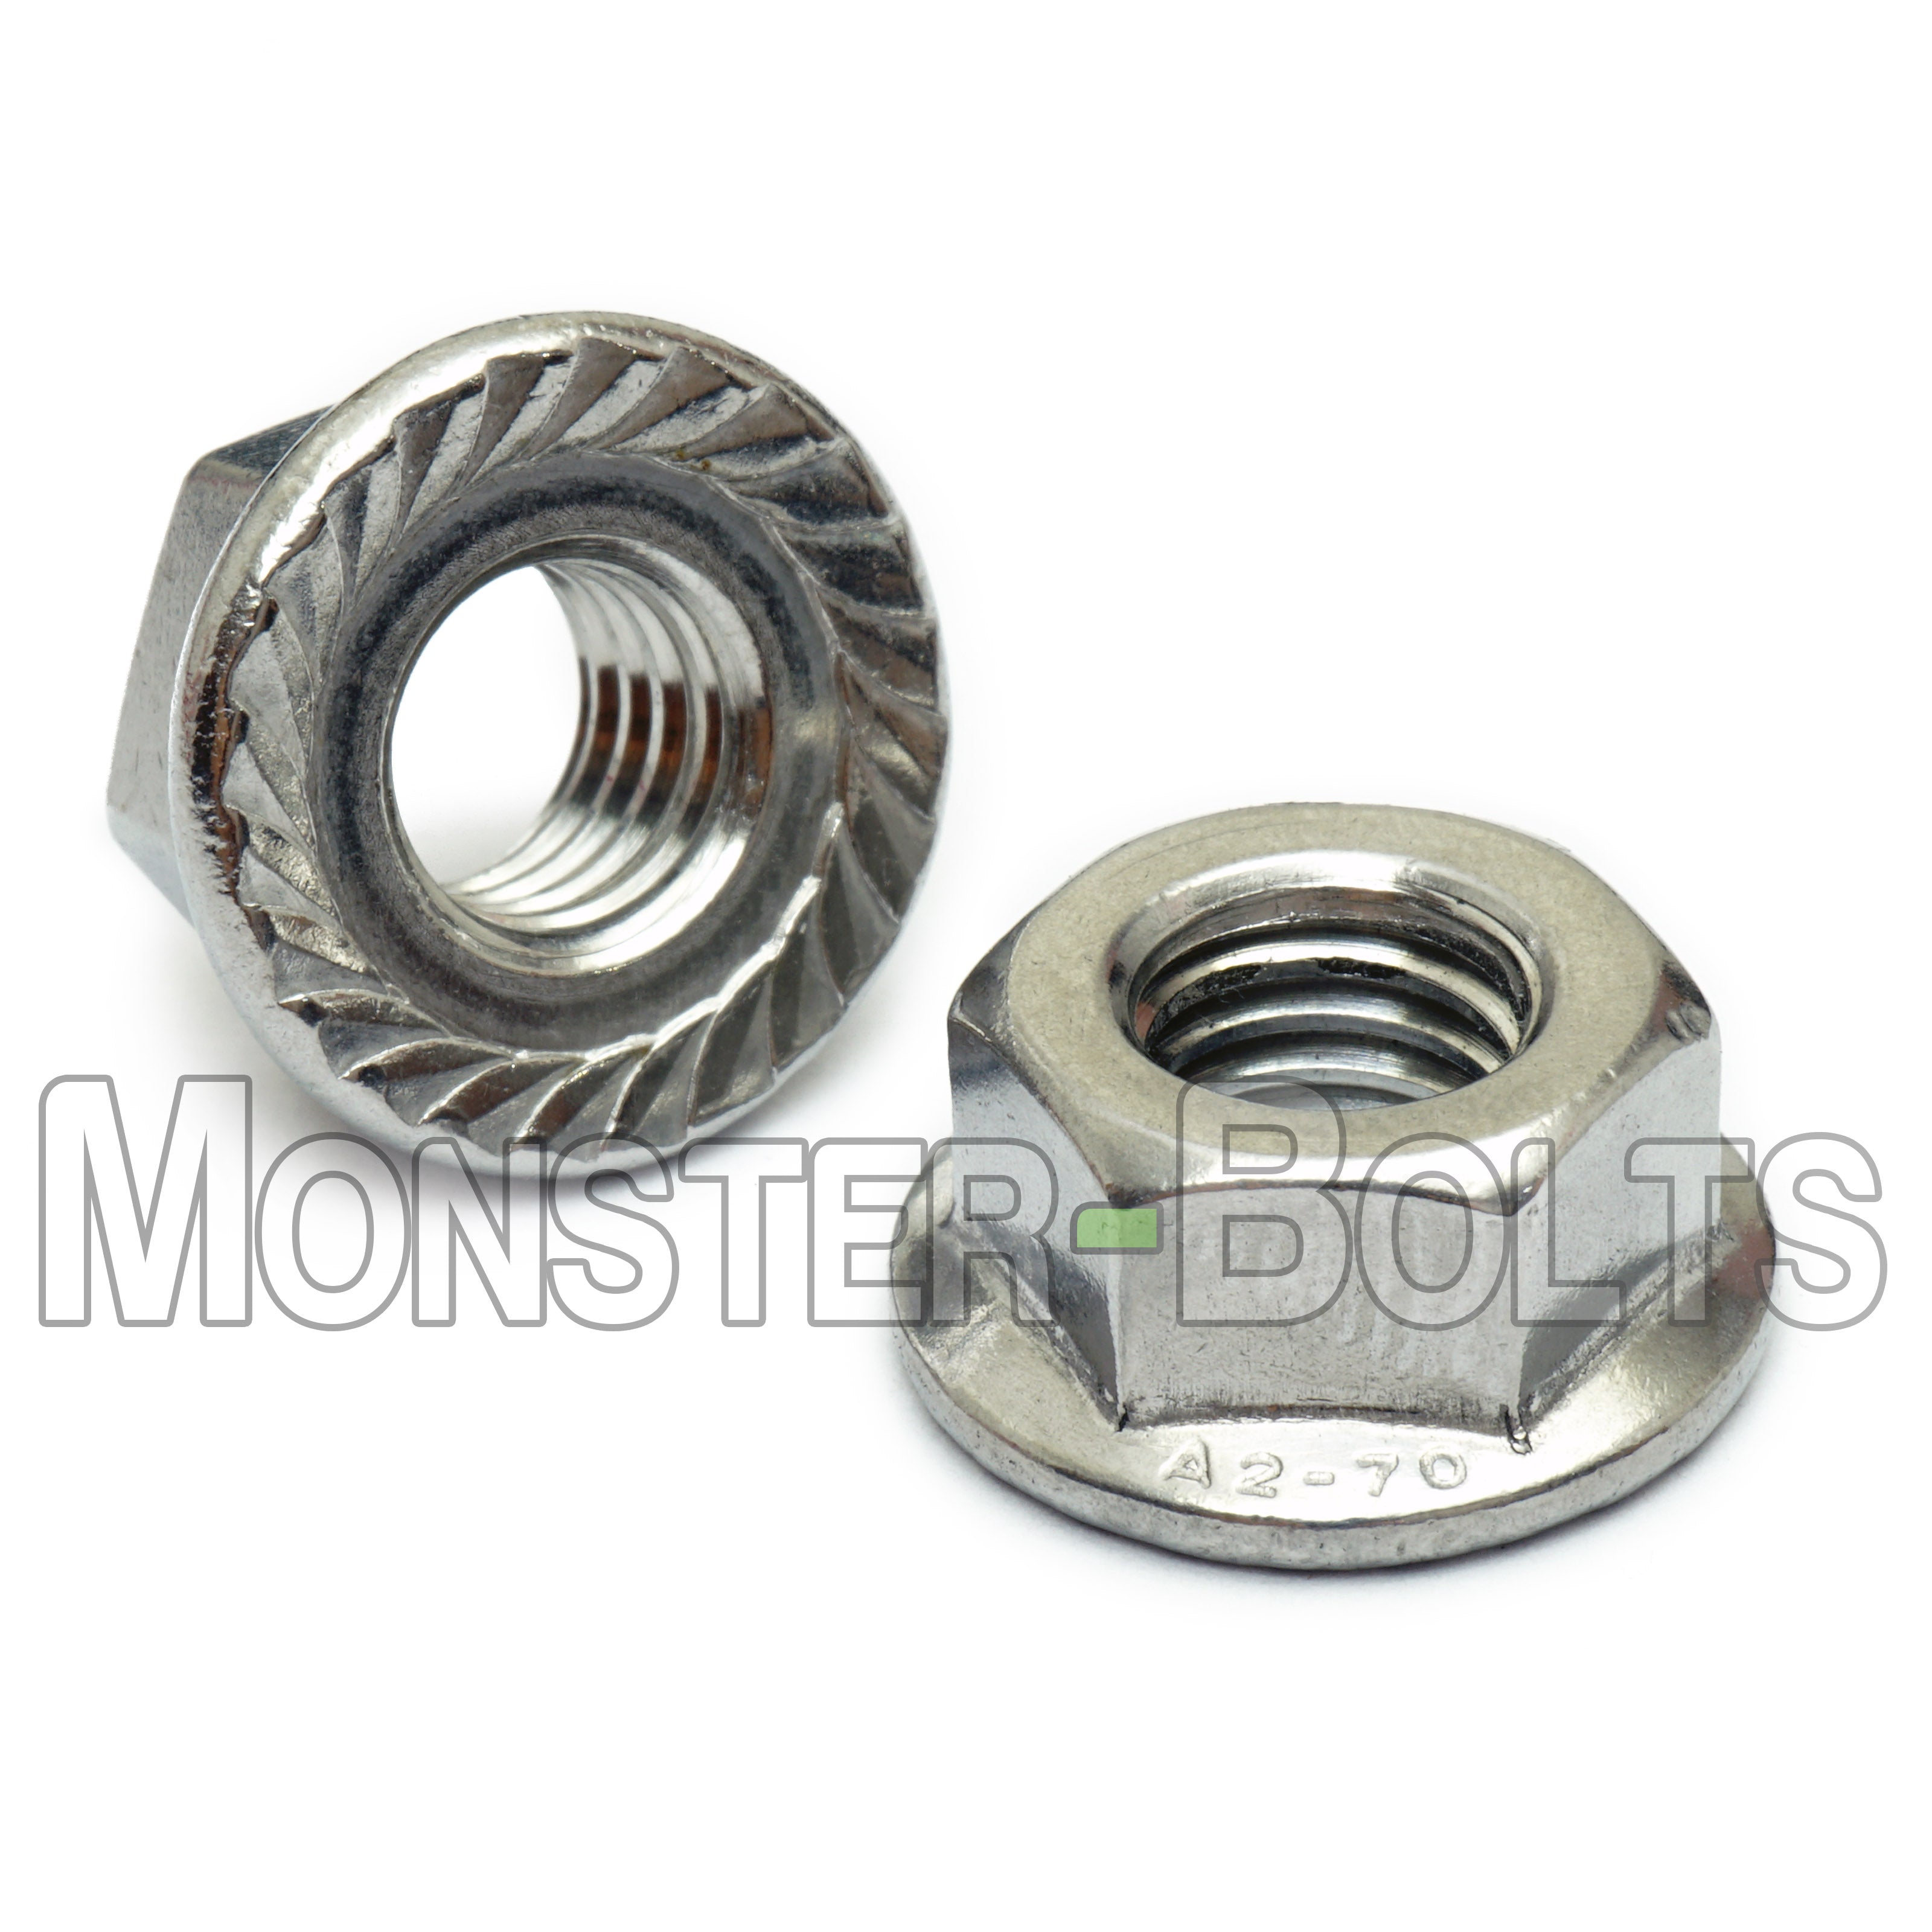 Details about   M2,3,4,5,6,8~16 Black Zinc-Plated Hex Serrated Flange Nuts DIN6923 Flanged Nut